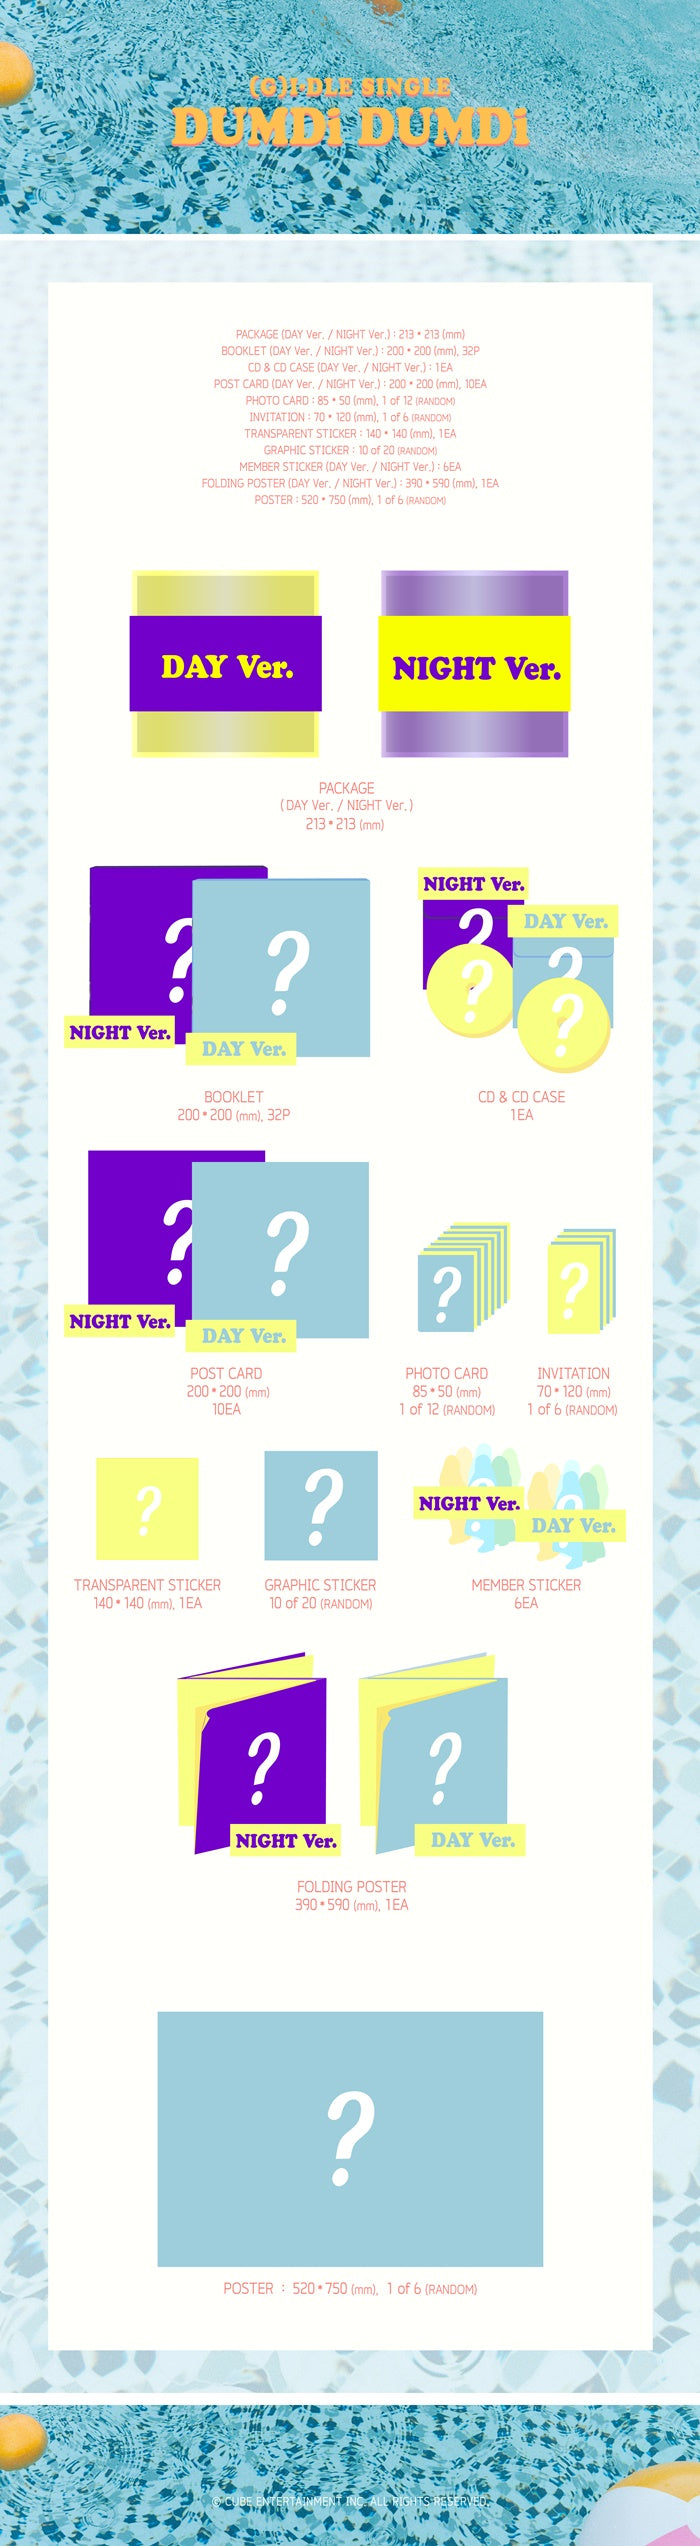 1 CD
1 Poster On Pack
1 Booklet (32 pages)
10 Post
1 Photo Card
1 Invitation
1 Sticker
1 Graphic Sticker
1 Member Sticker